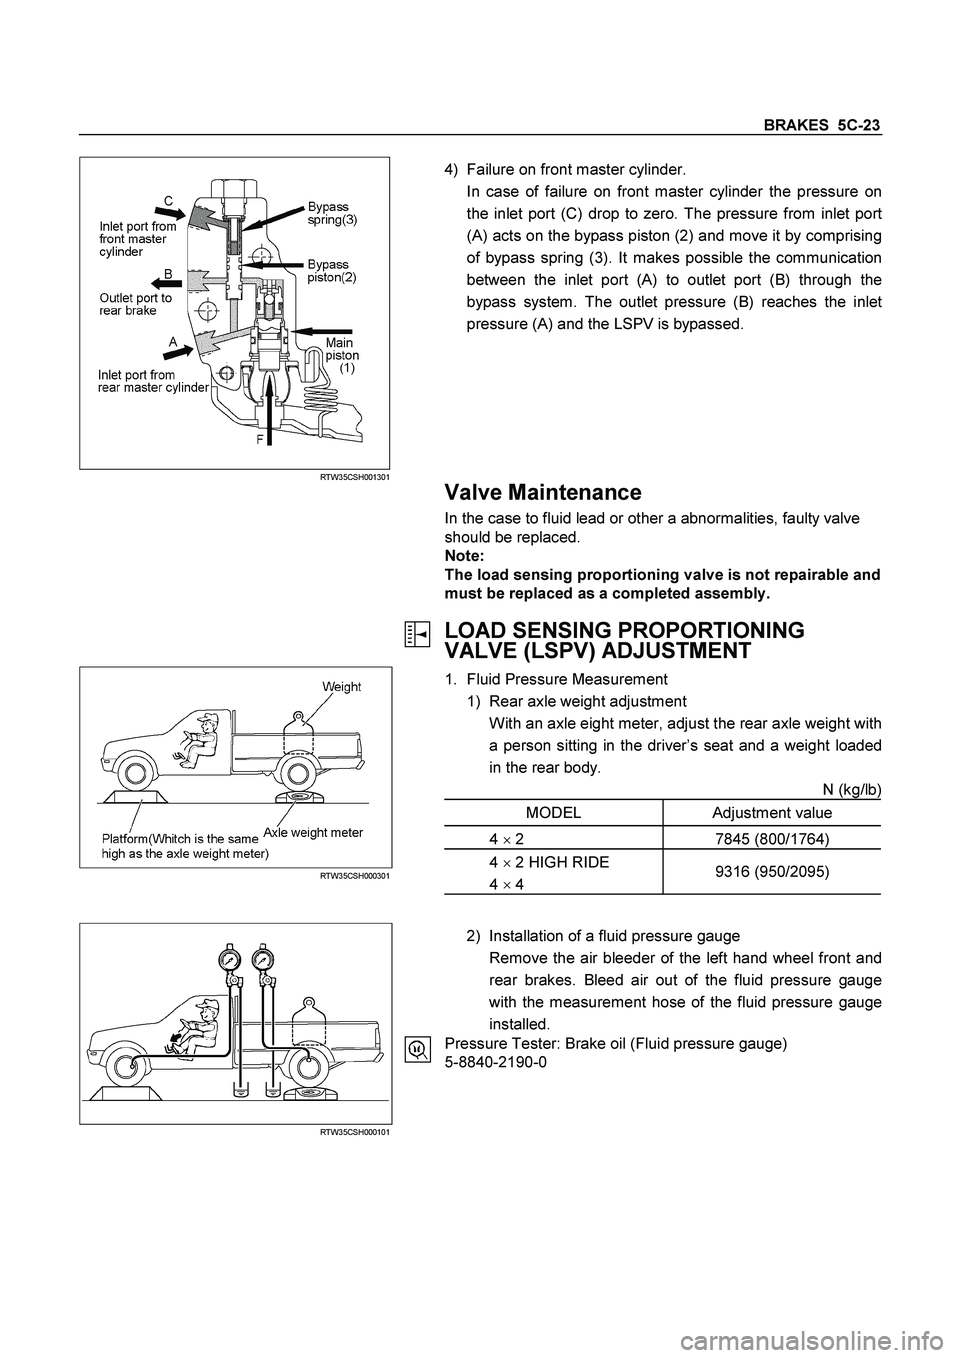 ISUZU TF SERIES 2004  Workshop Manual BRAKES  5C-23
 
 RTW35CSH001301 
 
 4)  Failure on front master cylinder. 
  In case of failure on front master cylinder the pressure on 
the inlet port (C) drop to zero. The pressure from inlet por
t